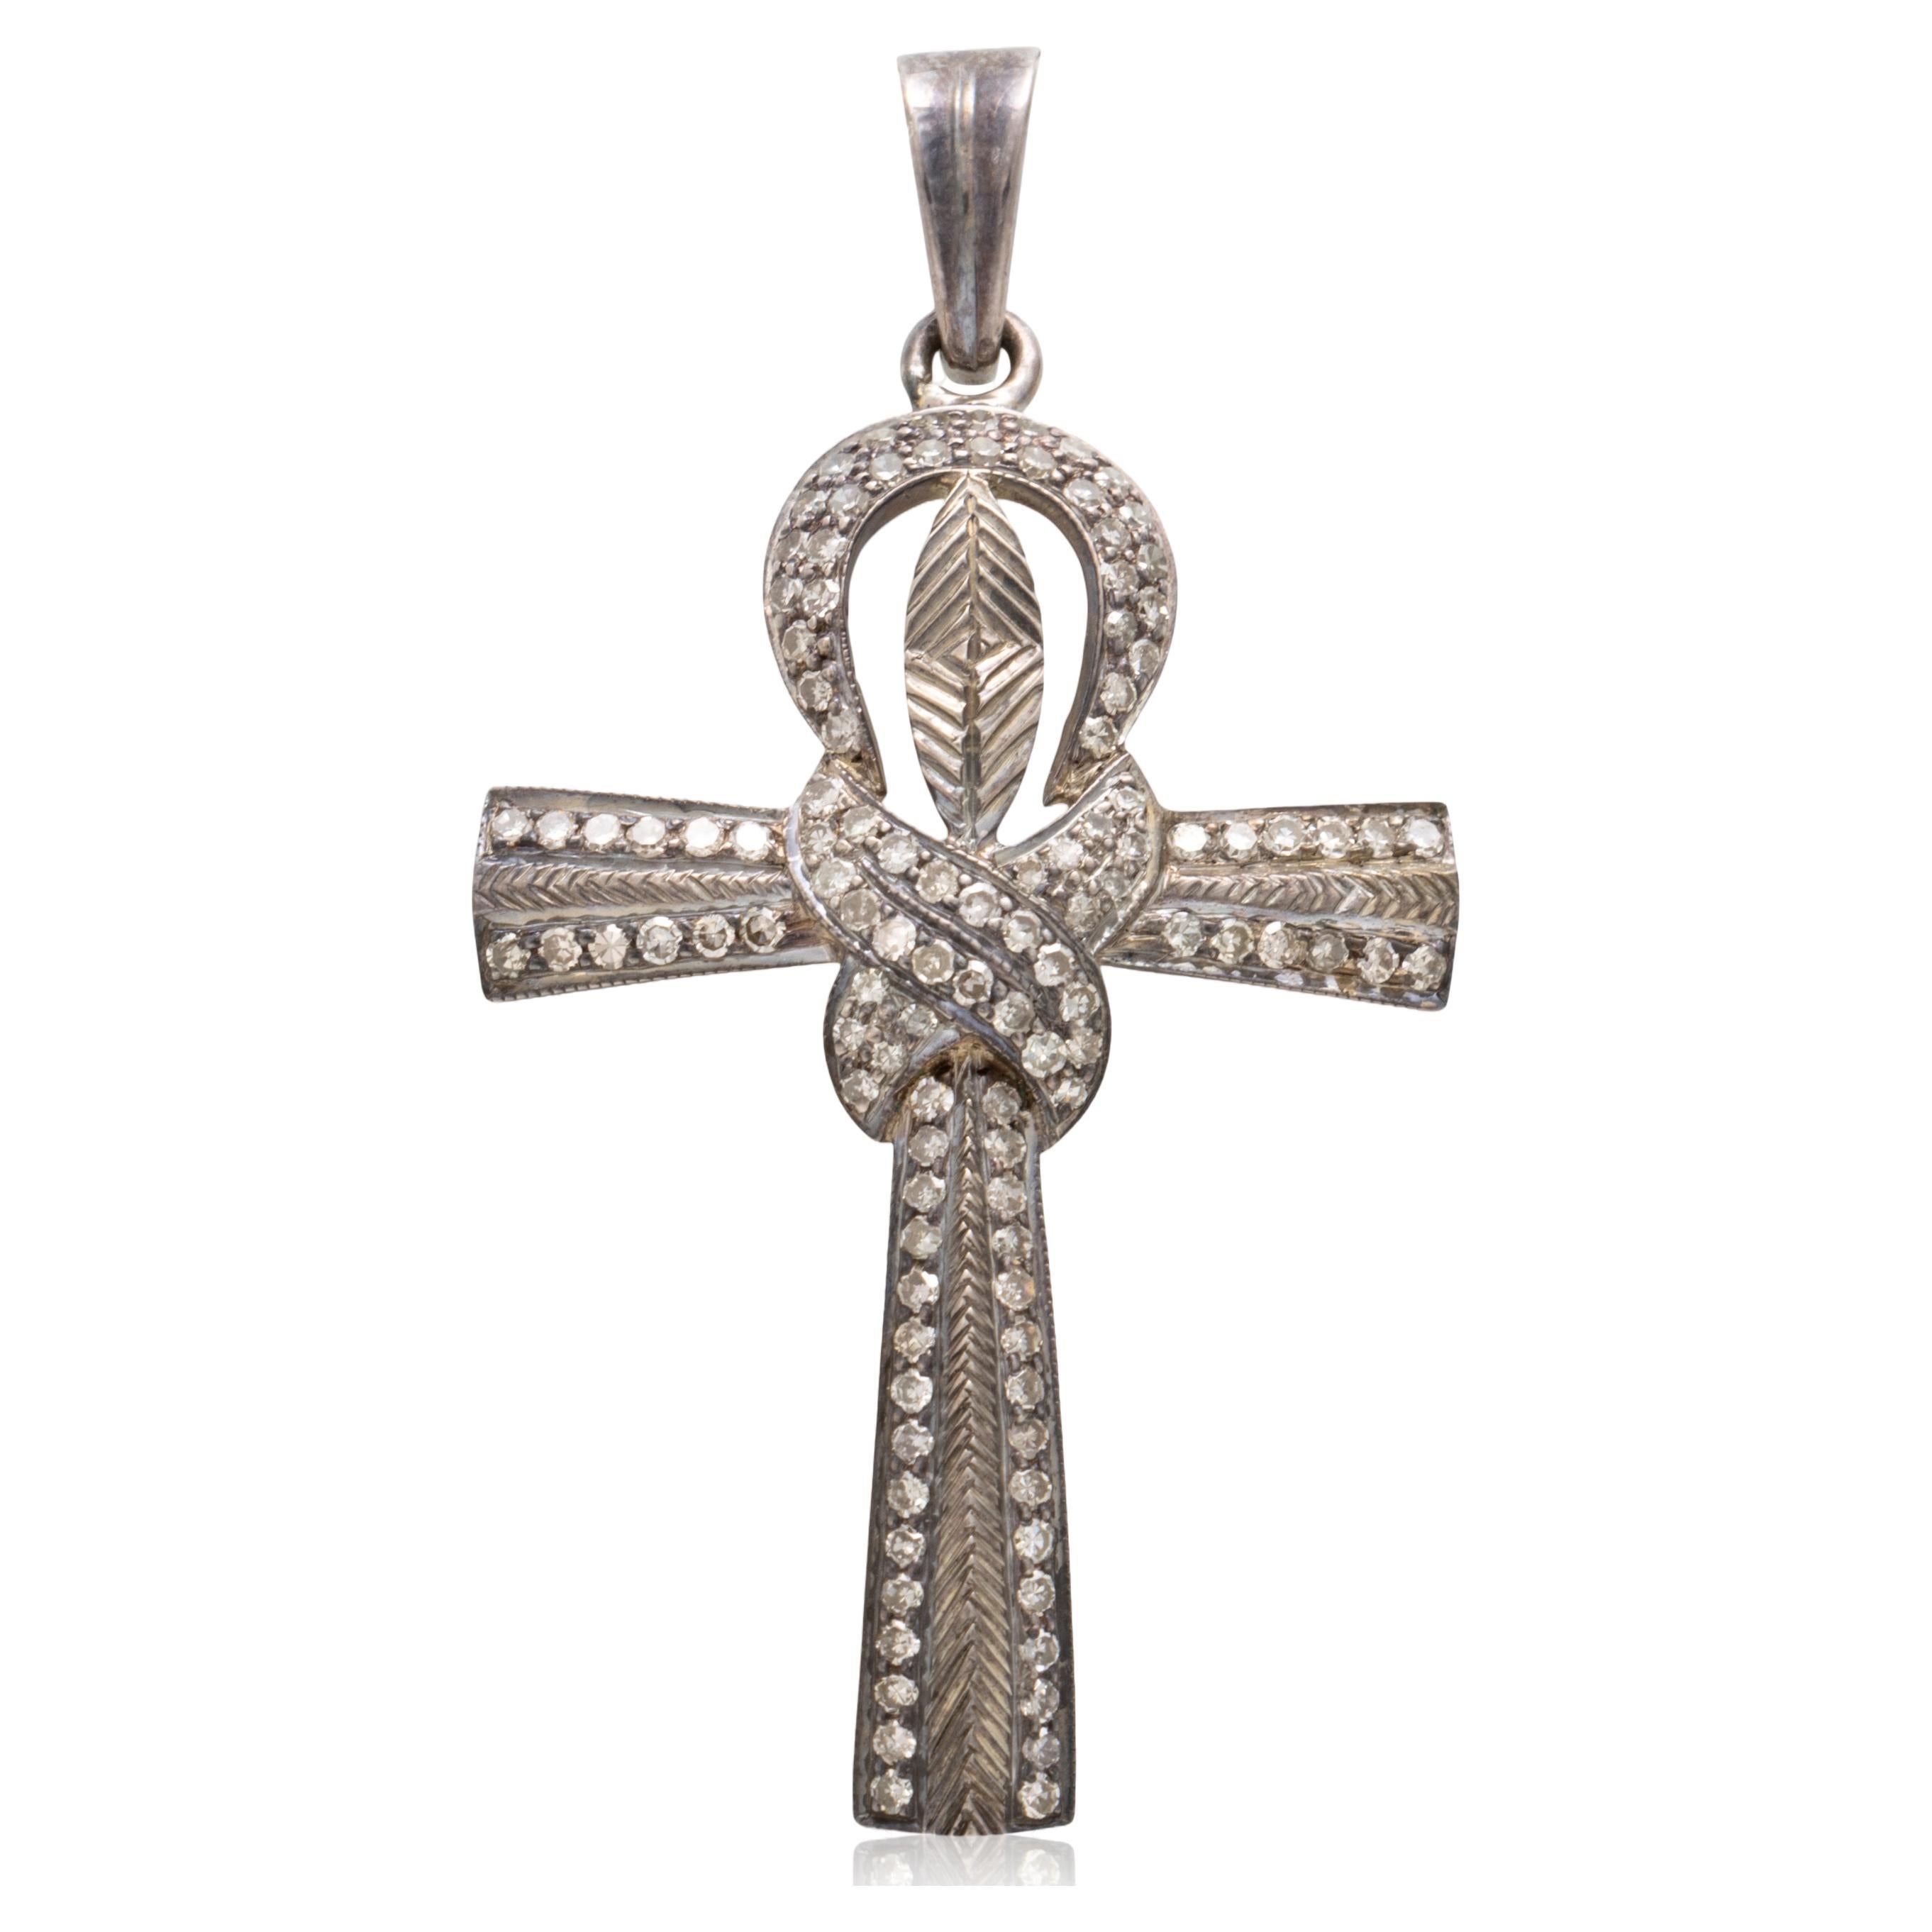 Diamond and Silver Anubis Knotted Cross Pendant For Sale